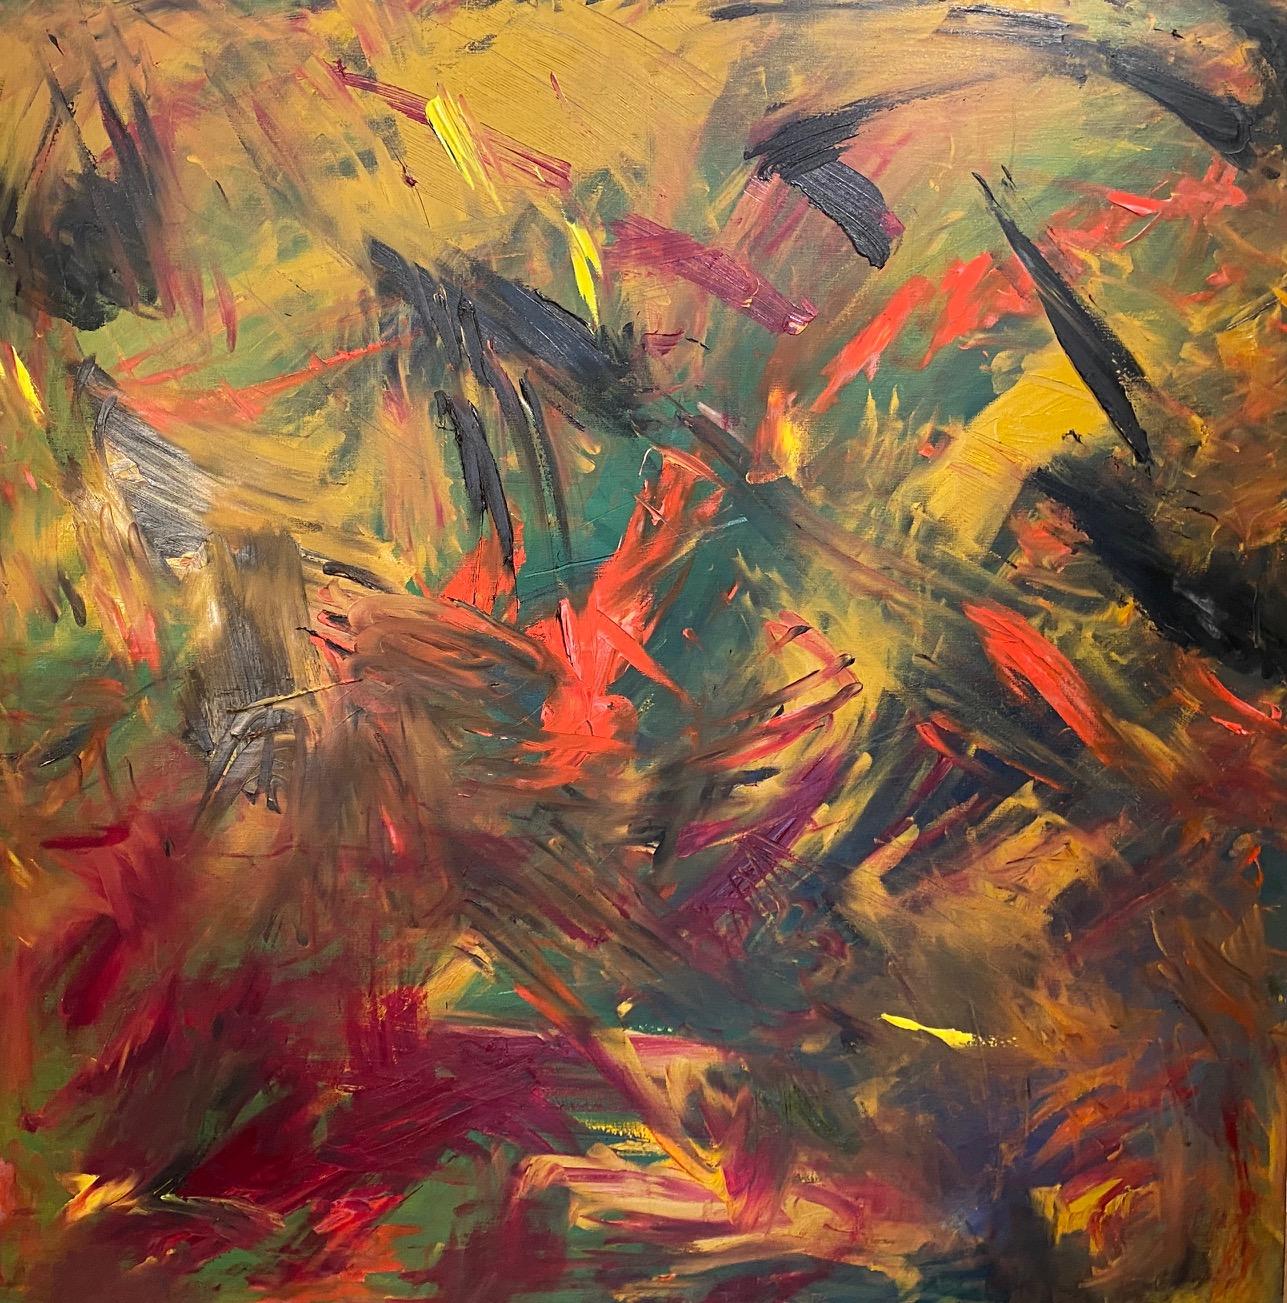 Kristy Chettle Abstract Painting - "Untitled" Oil On Canvas